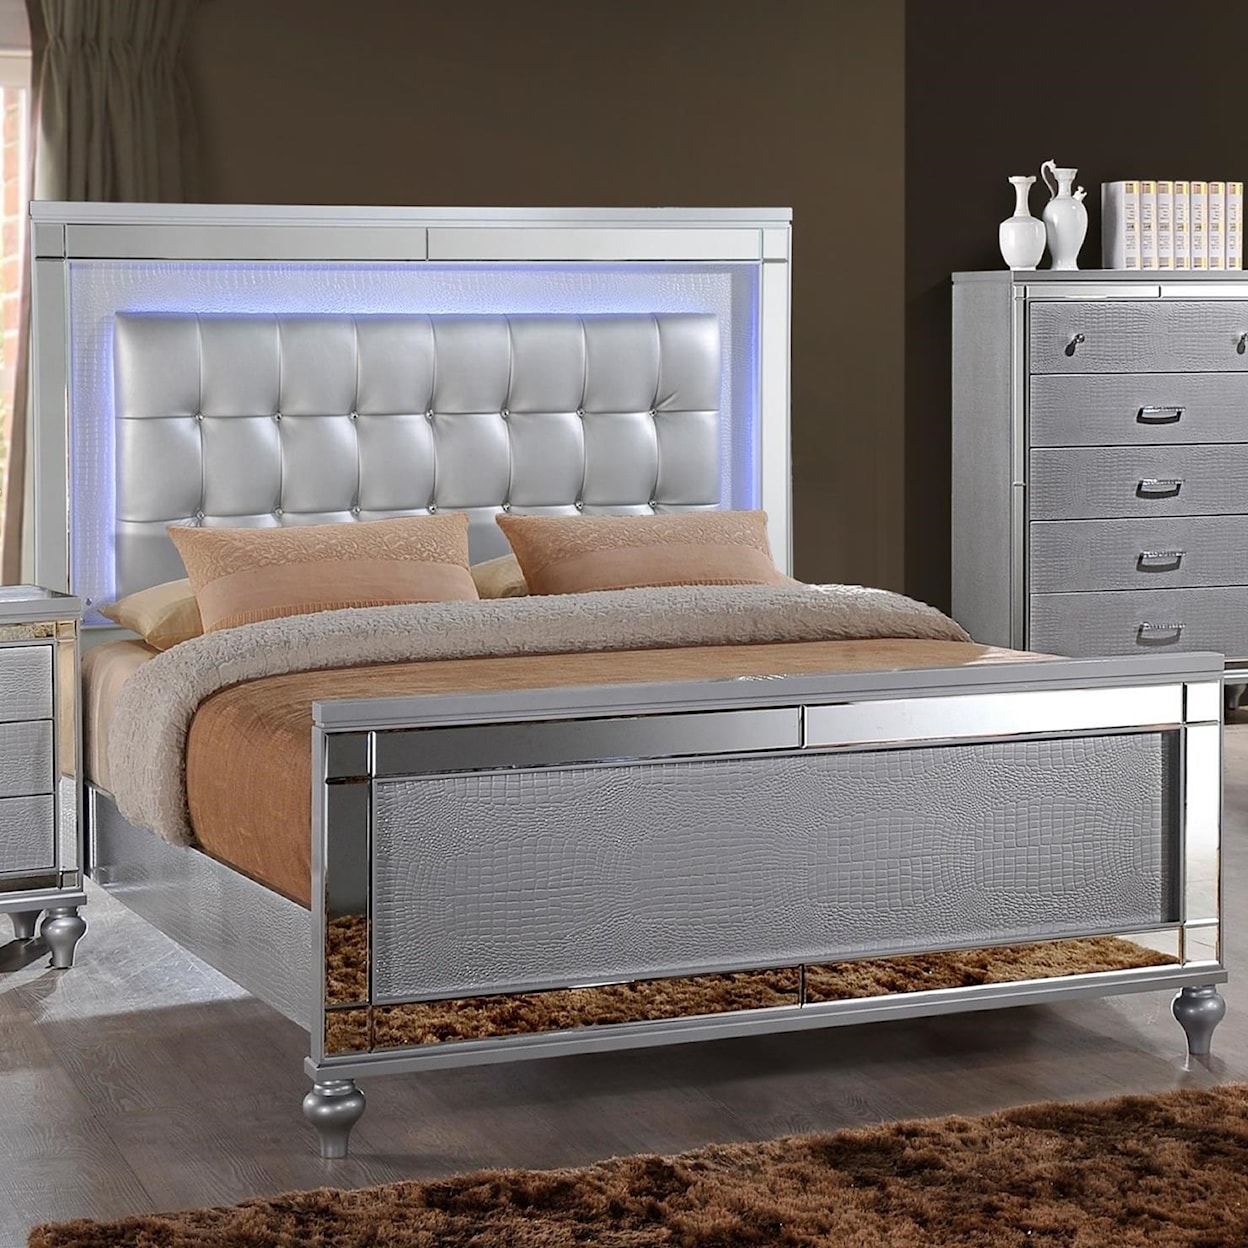 New Classic Milan VALENTINO SILVER LIGHT UP FULL BED |